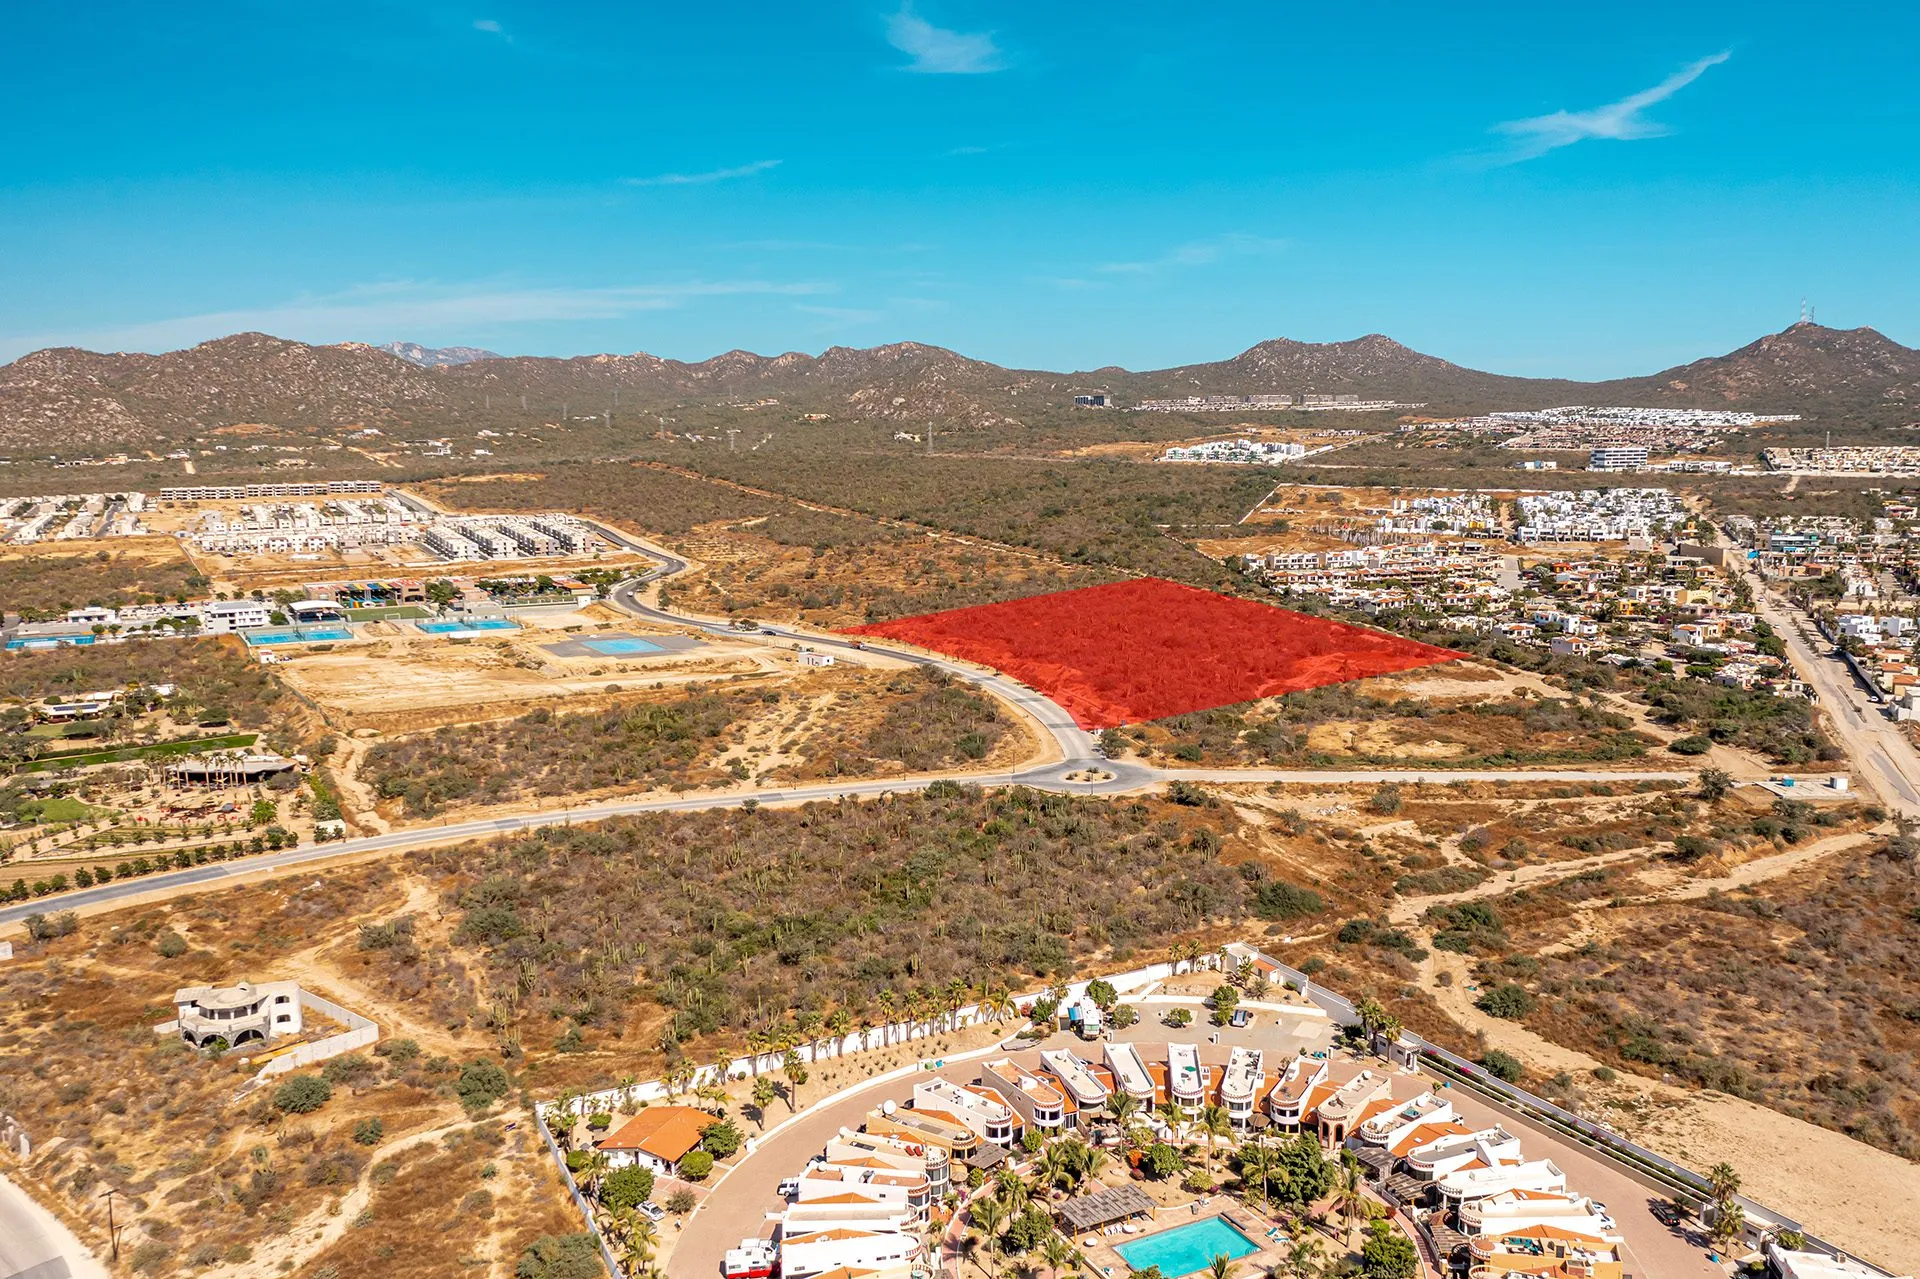 Lot VIII-B, is an excellent option for residential development. This 9.5 acre development parcel is located inside one of the most popular communities in Los Cabos. With a natural downward slope this lot offers incredible views of Cabo's bay.